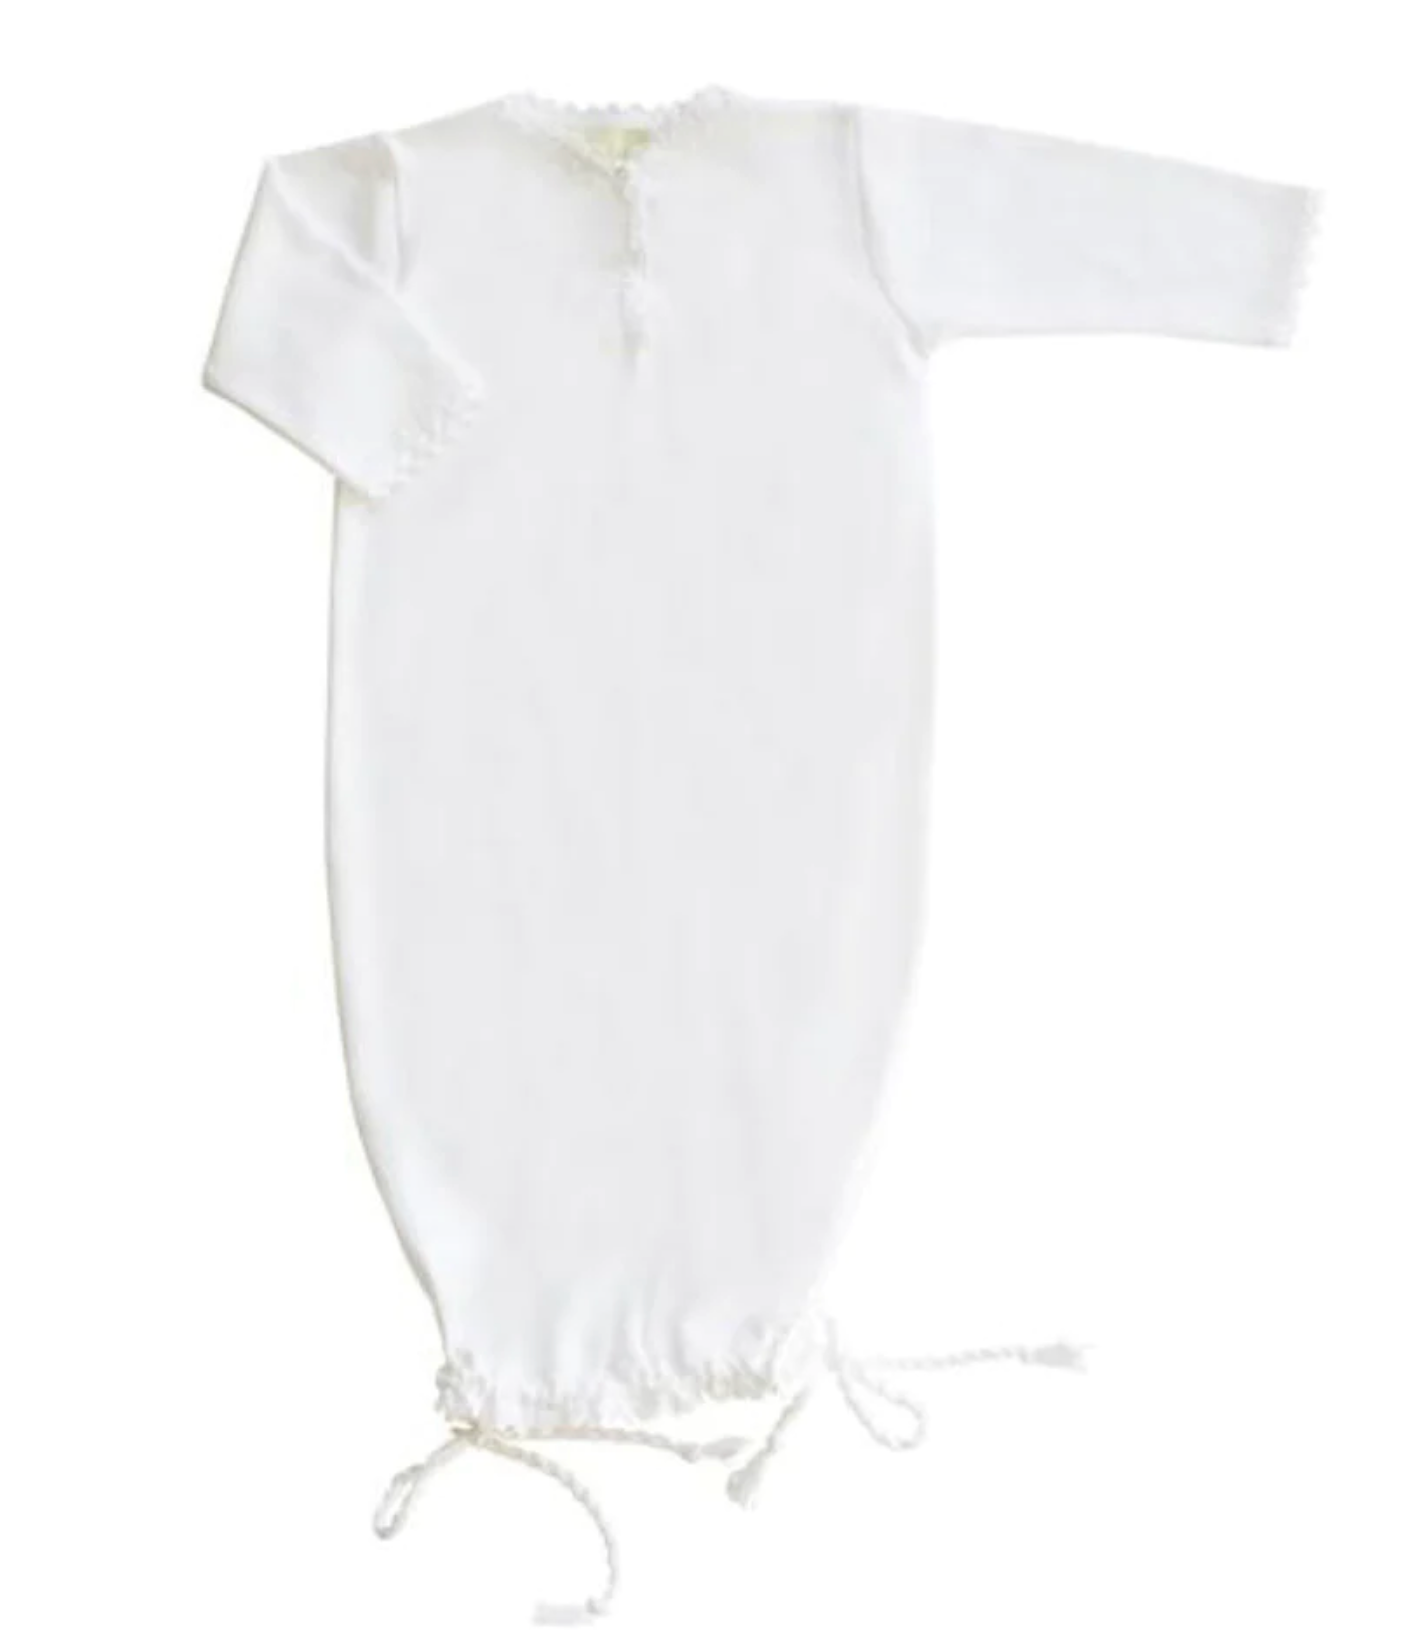 Jersey Sack Gown-White